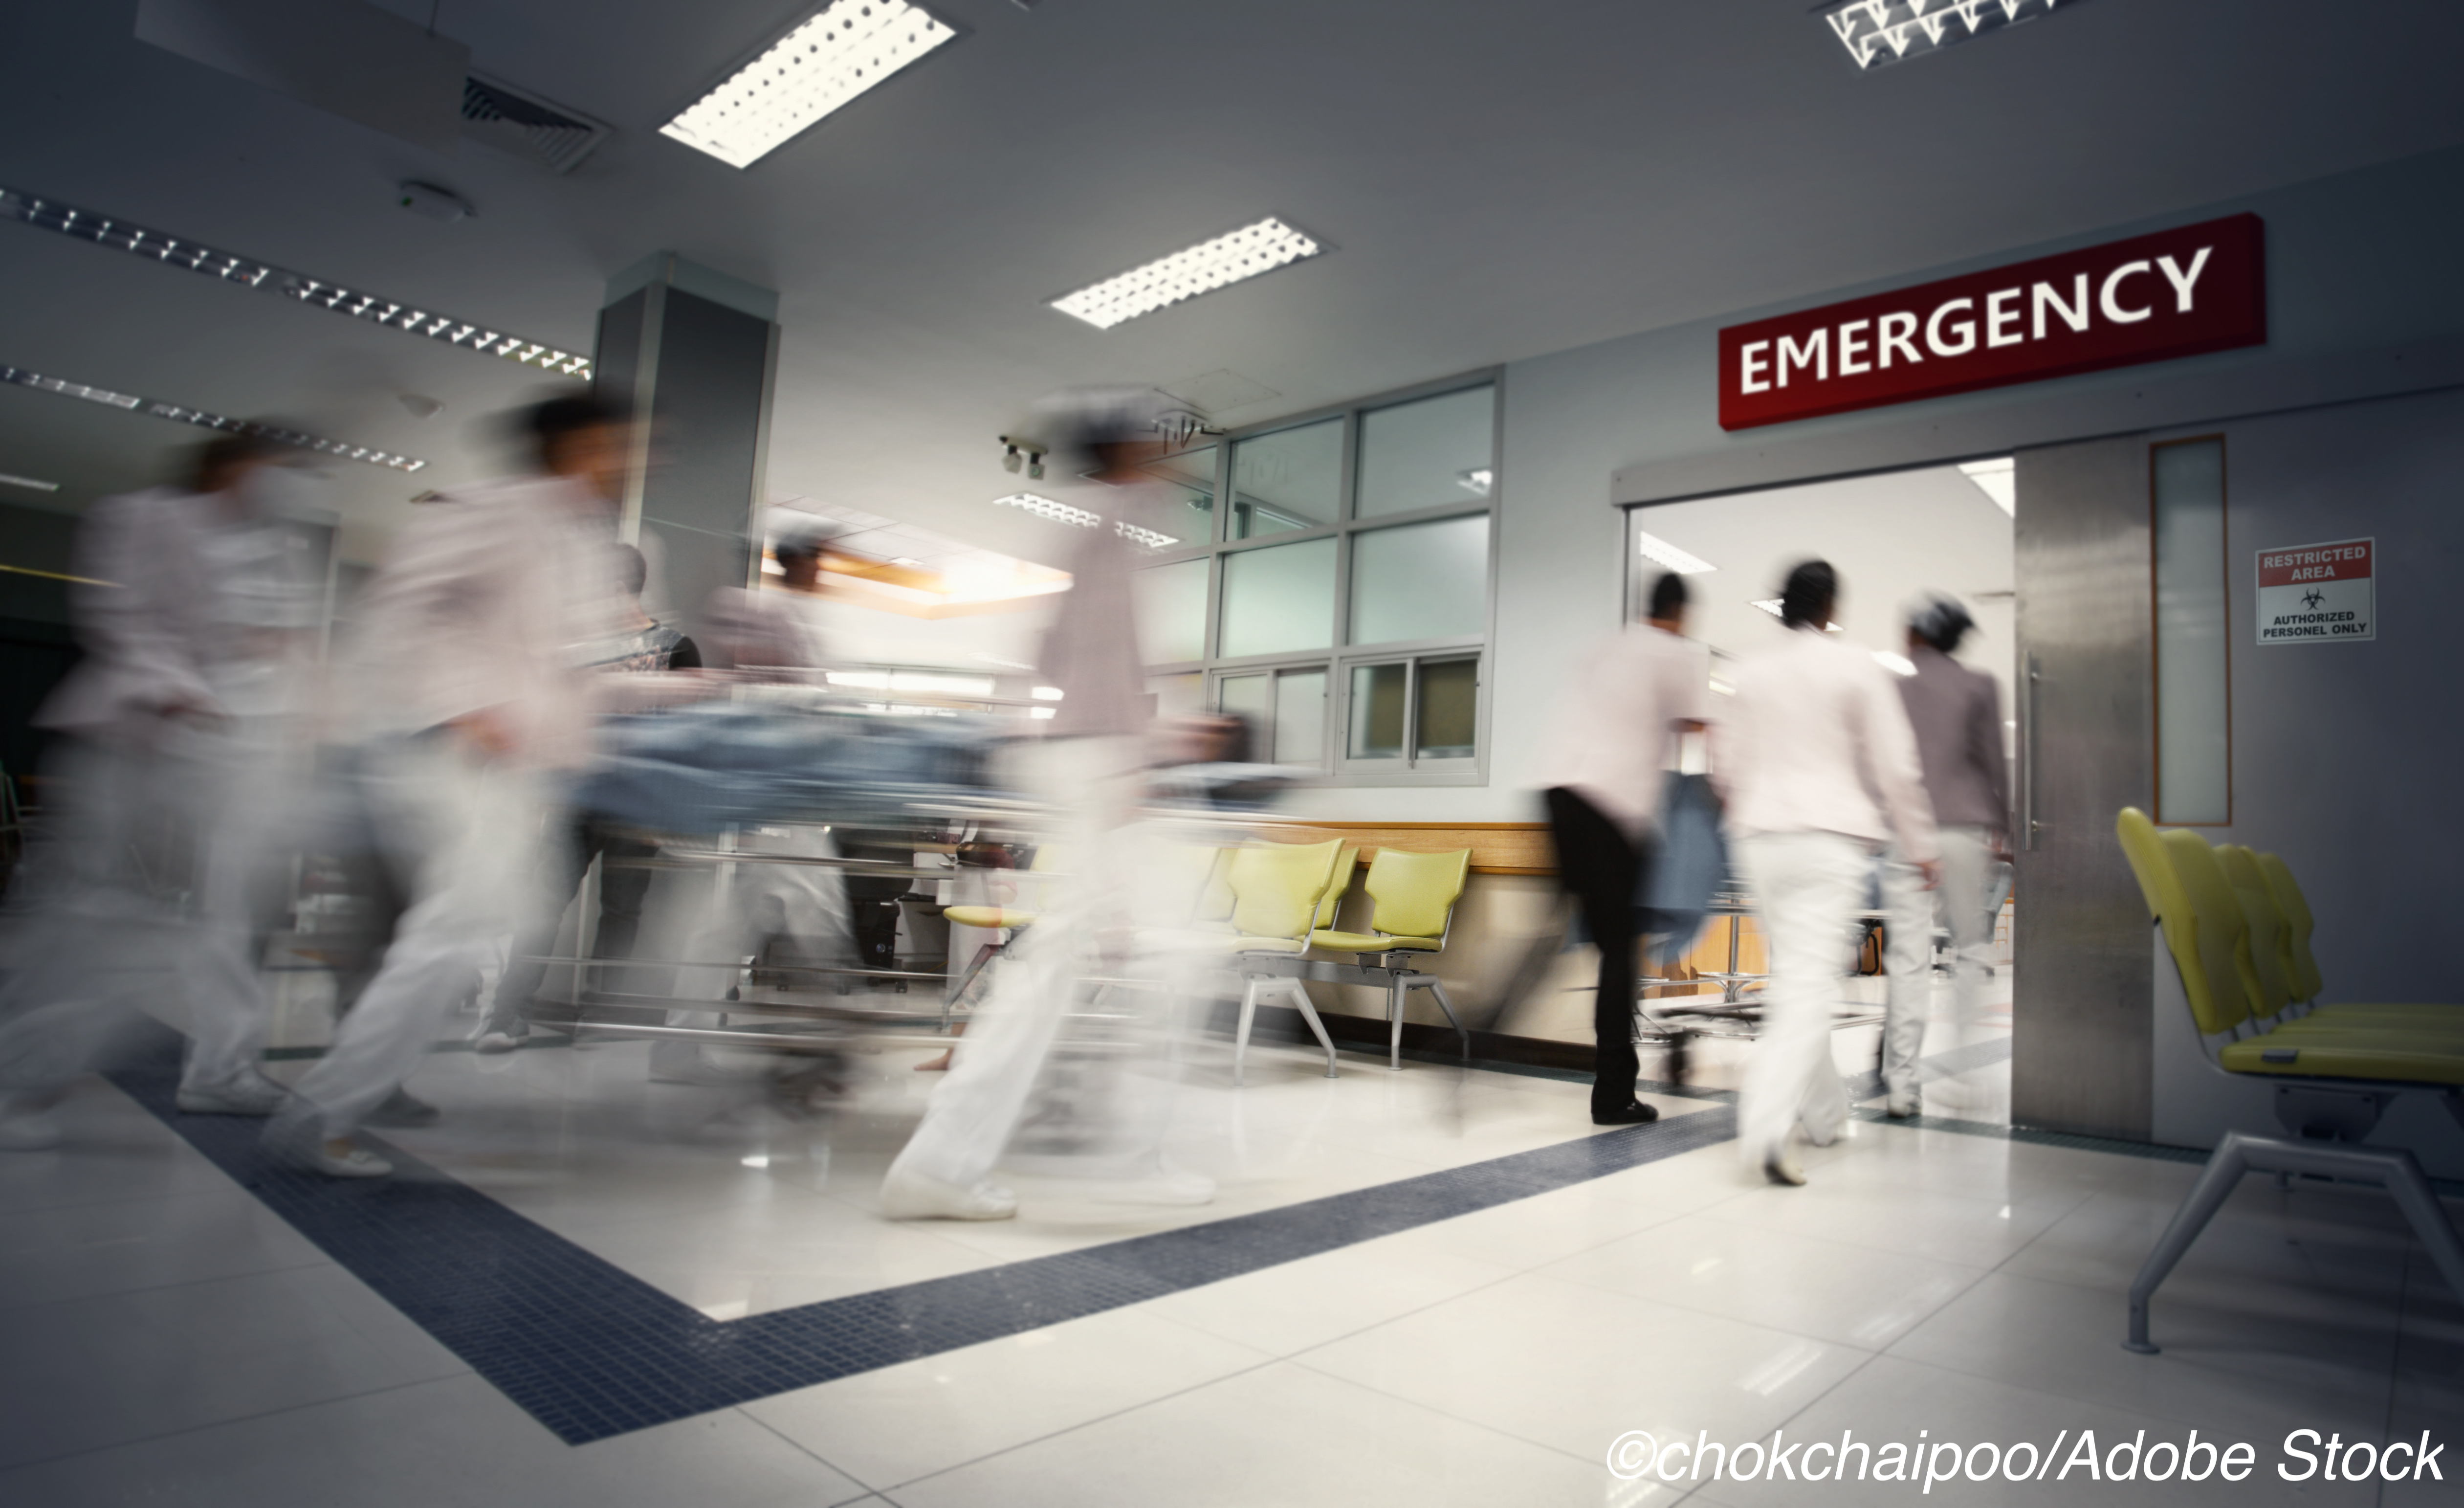 Changing Hospitals for Readmission After Emergency Surgery Ups Overall Mortality Rates